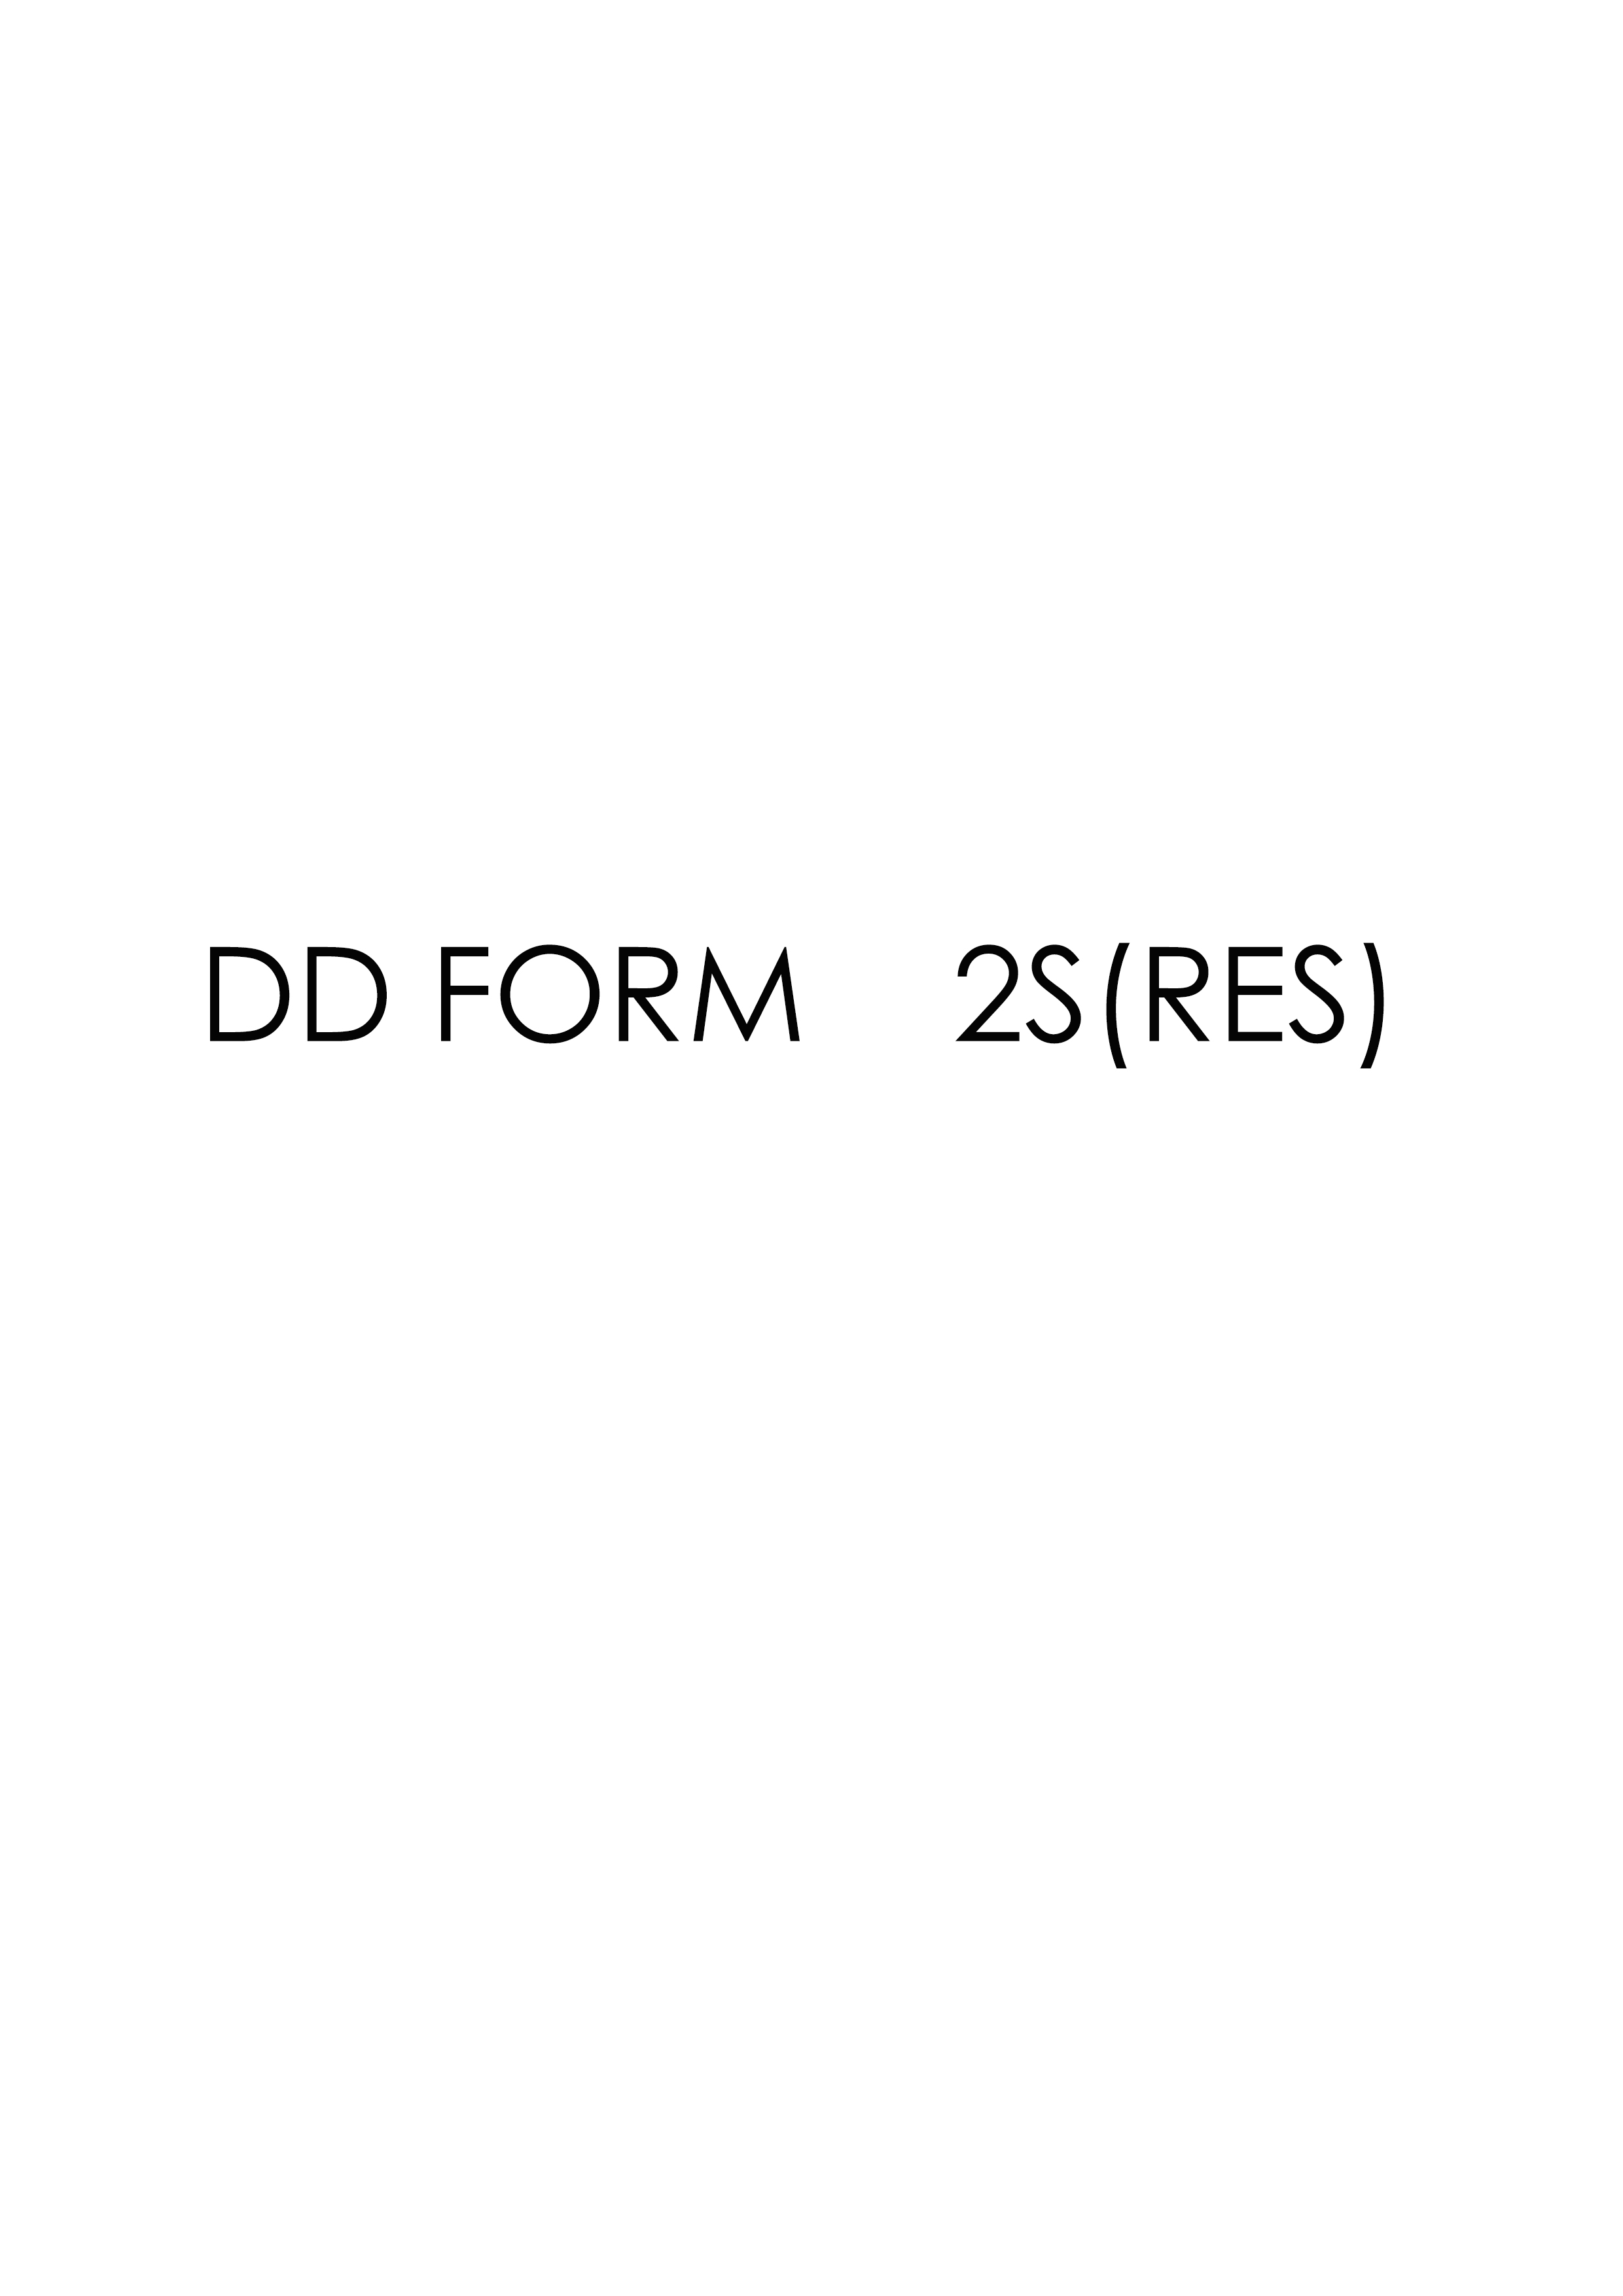 Download dd form 2S(RES)